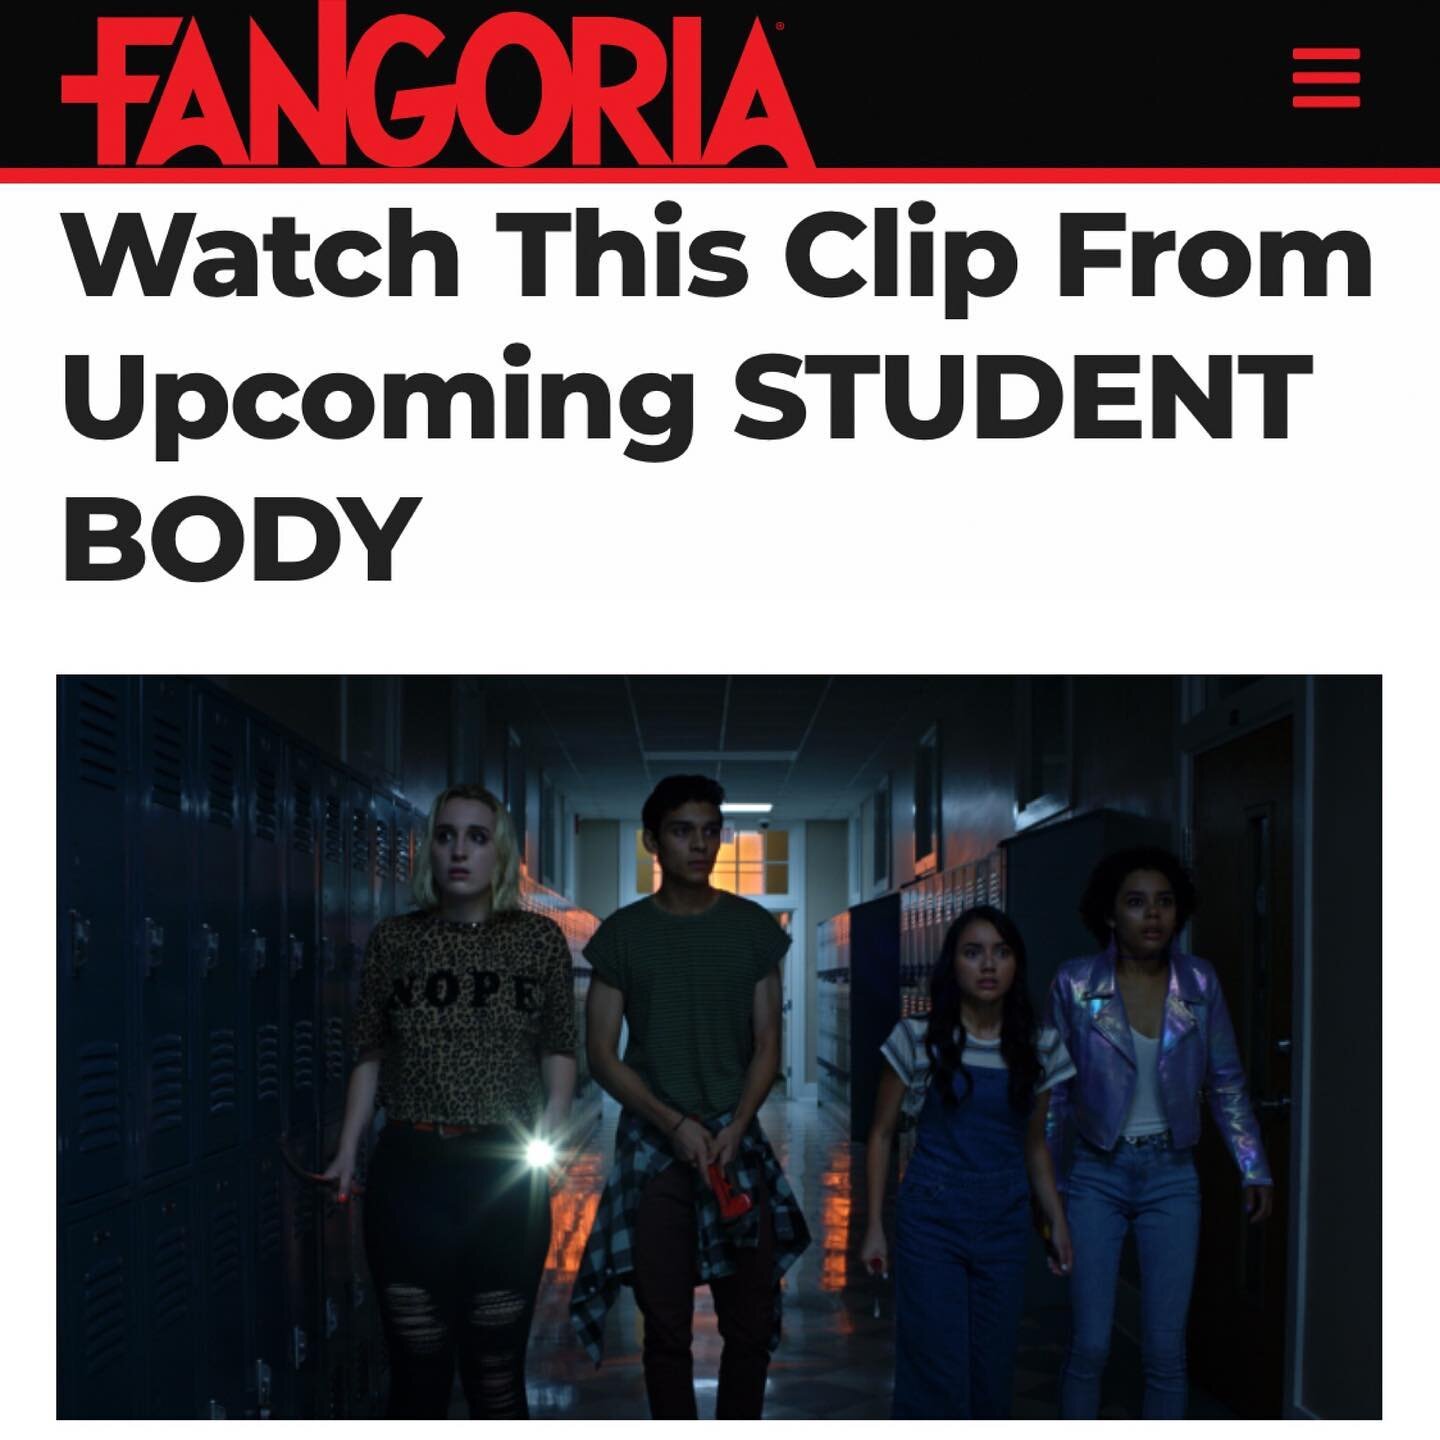 This one is special for us. Thank you @fangoria!